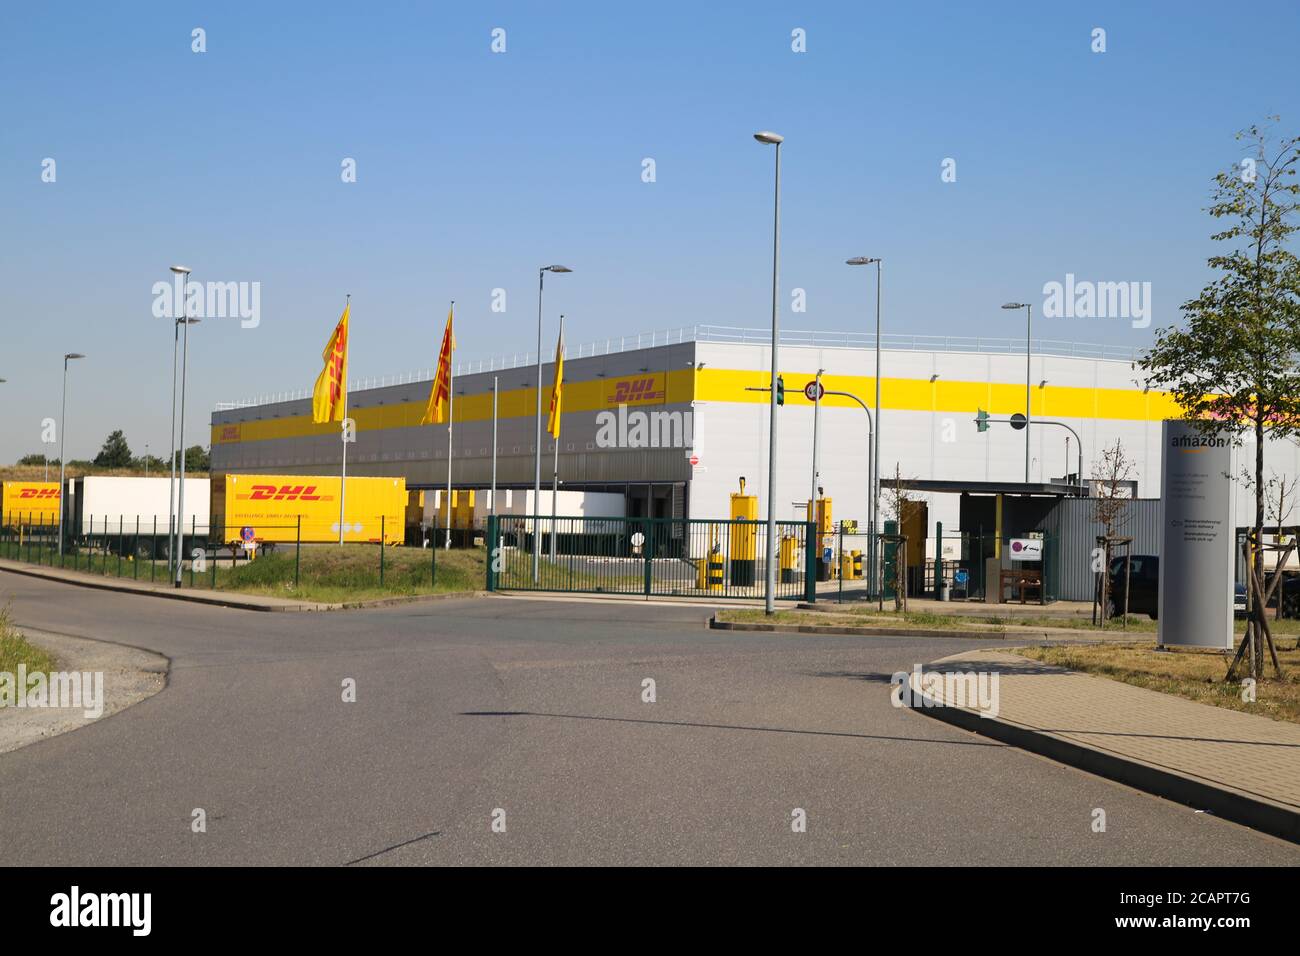 Page 2 - Dhl Parcel High Resolution Stock Photography and Images - Alamy